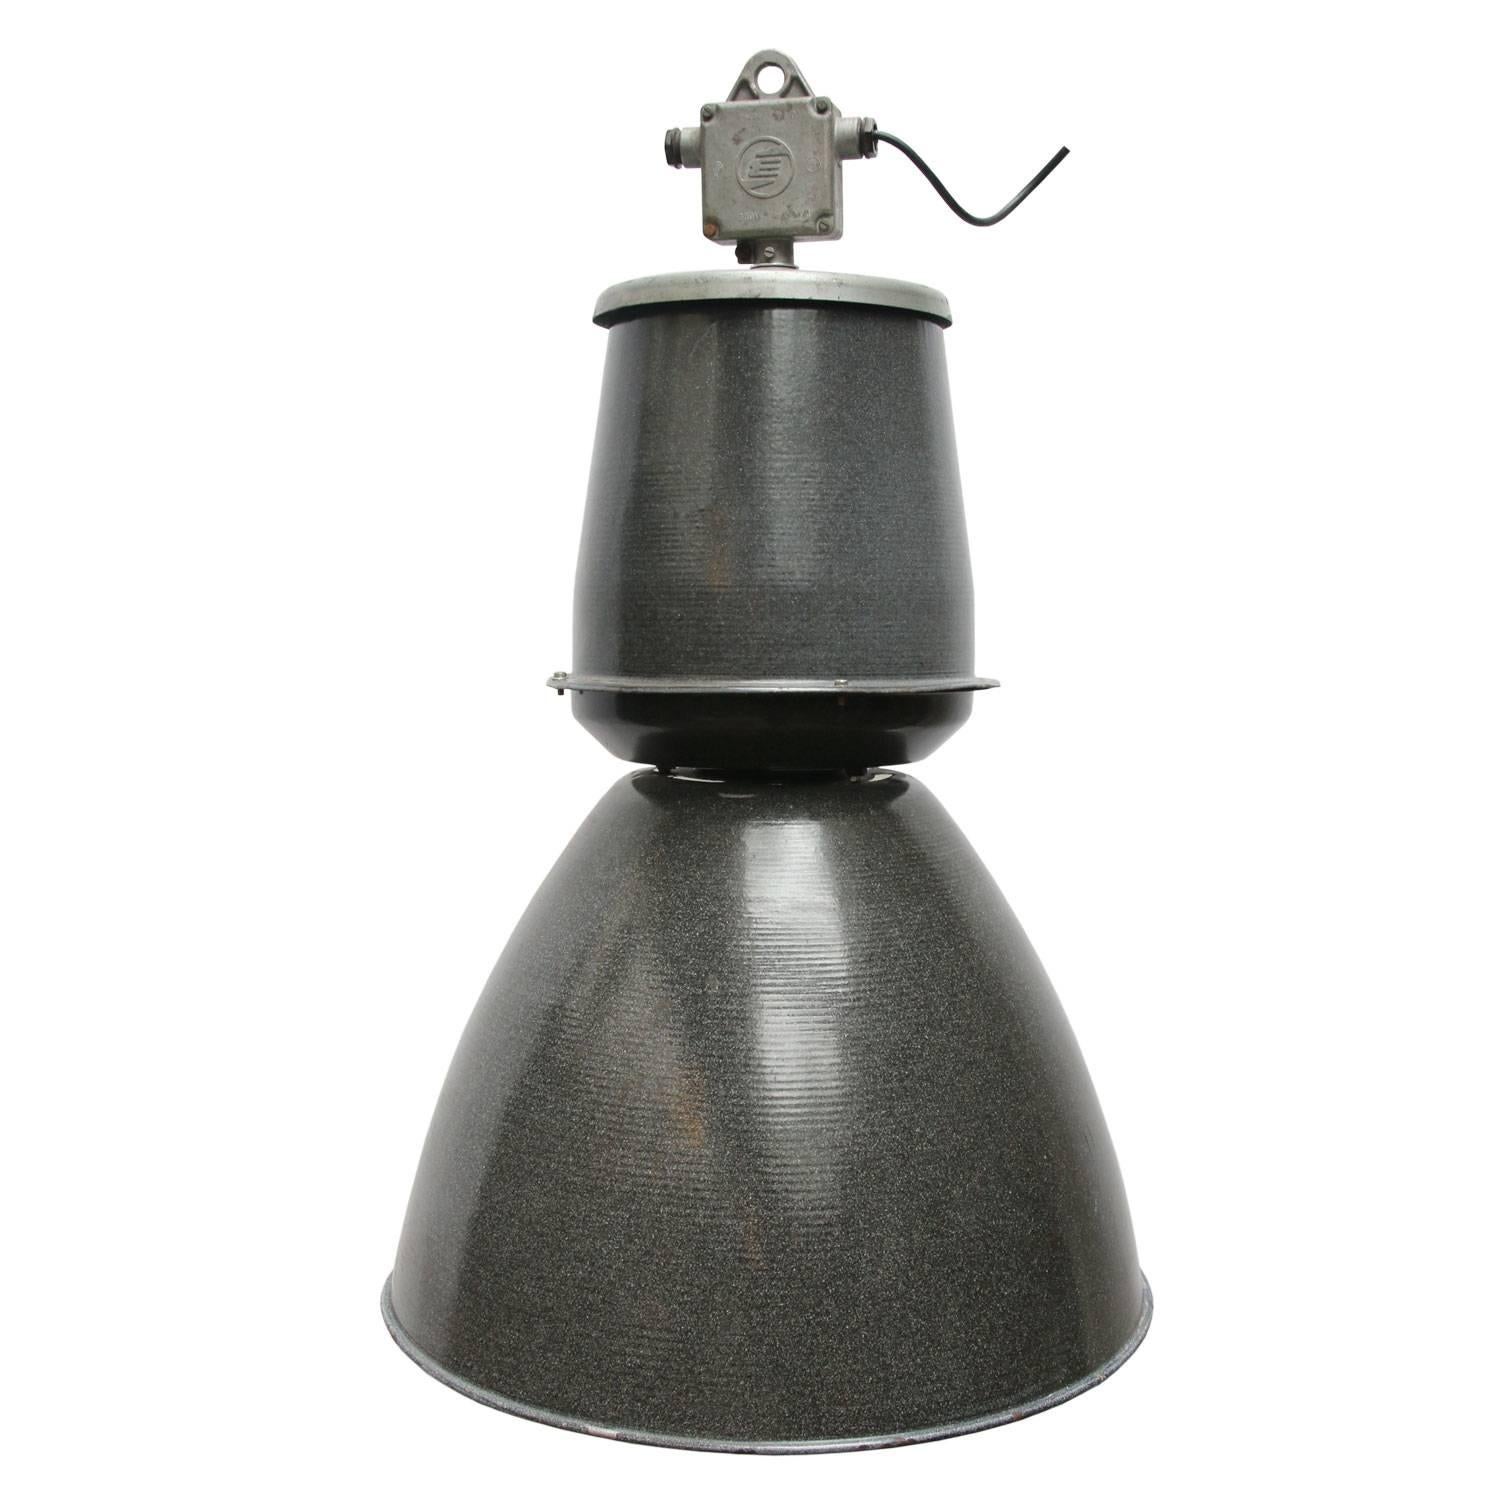 Big Industrial pendant. Light grey enamel. There is an open space in the middle where light comes through. A beautiful effect which enhances the shape of the lamp.

Measures: Weight 8.0 kg / 17.6 lb

All lamps have been made suitable by